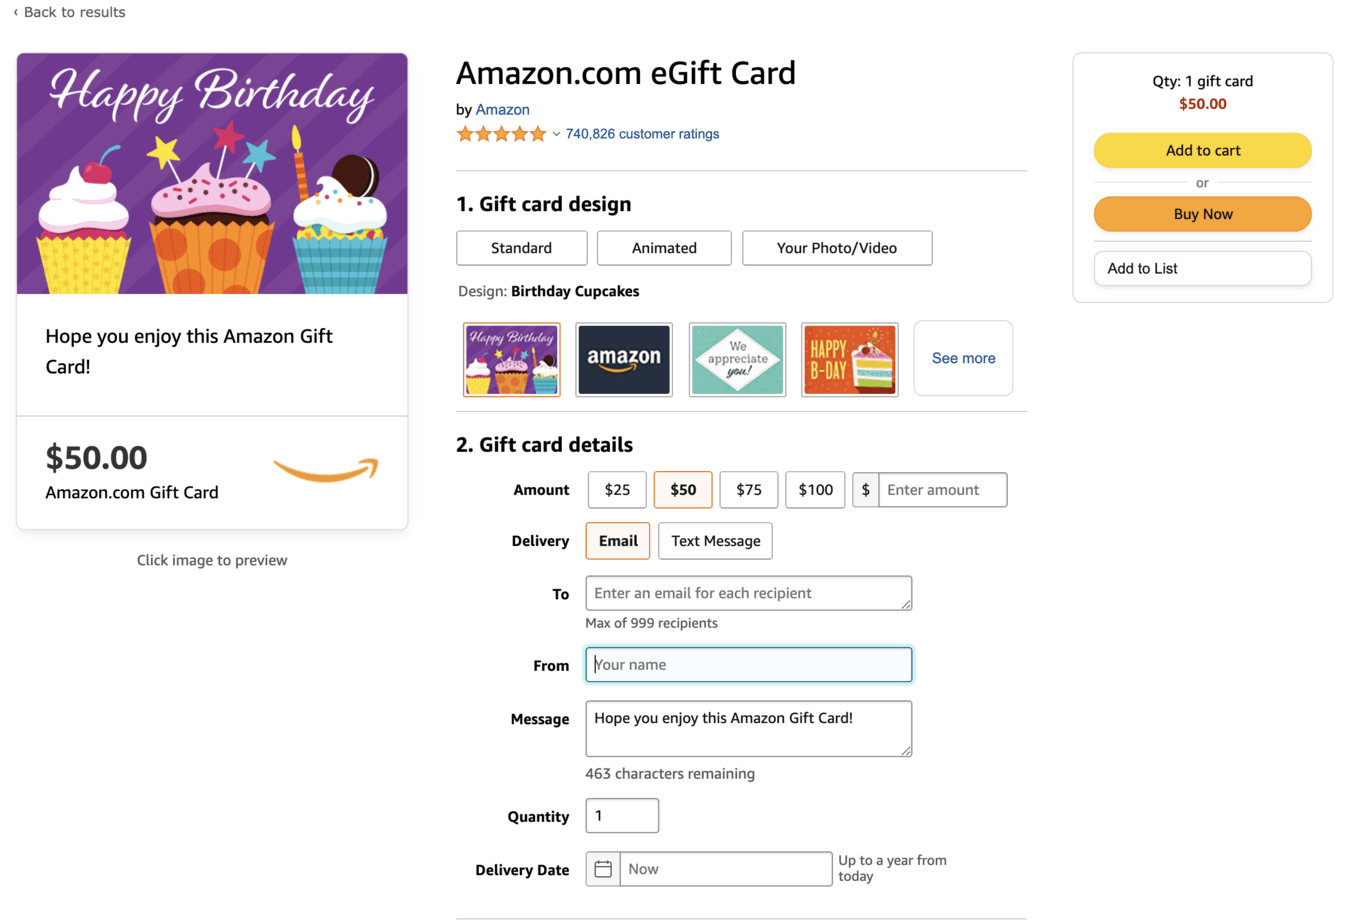 How to Send an Amazon Gift Card